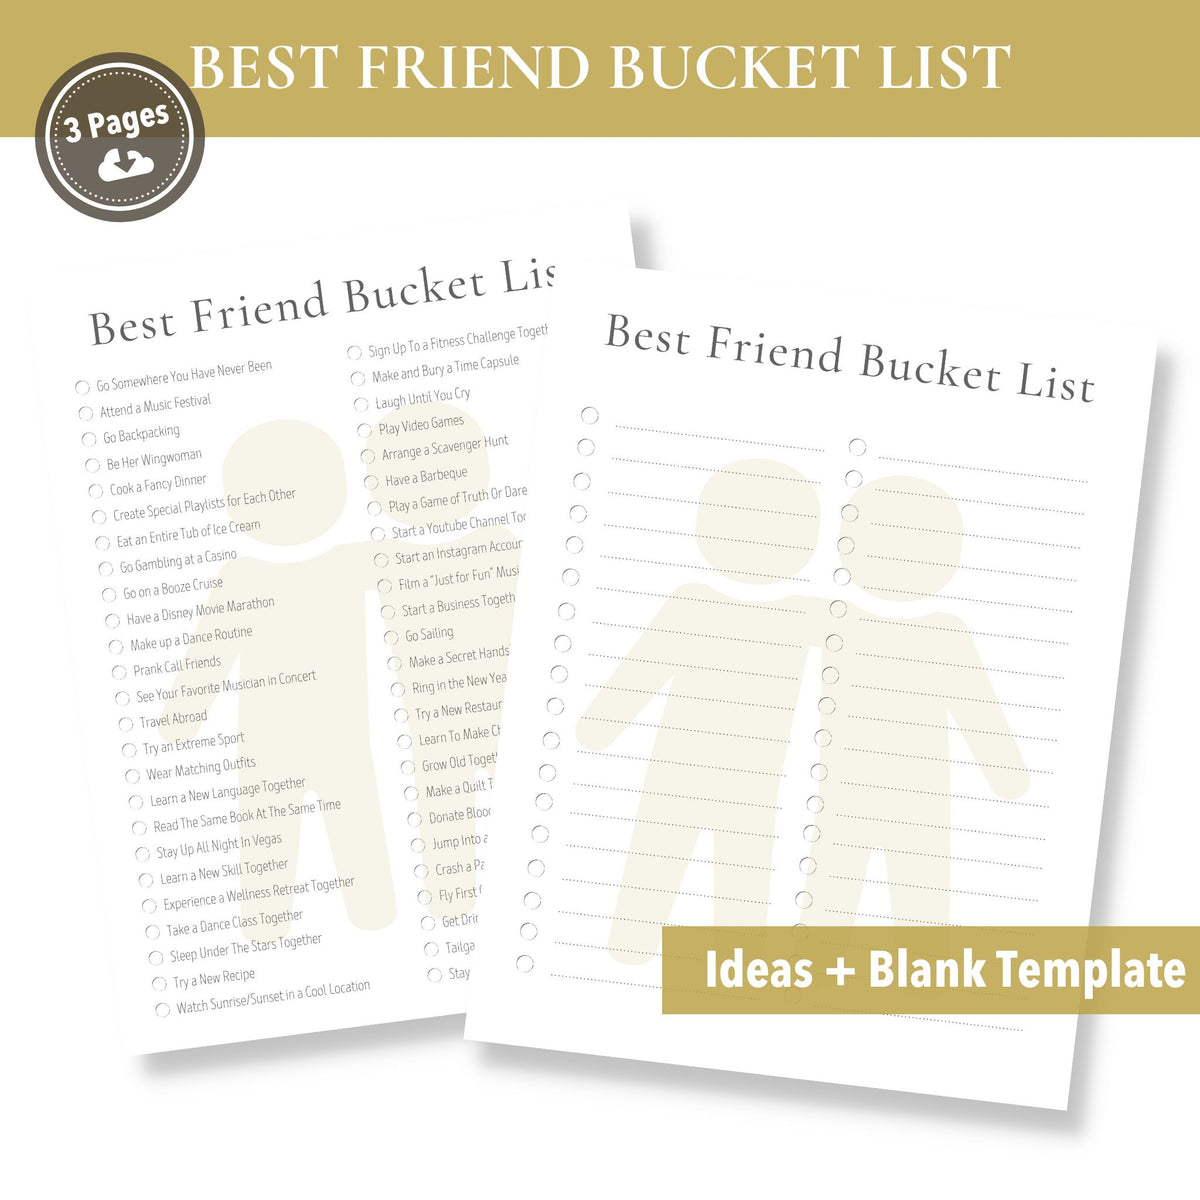 50 Things You Only Do With Your Best Friend - Best Friend Bucket List